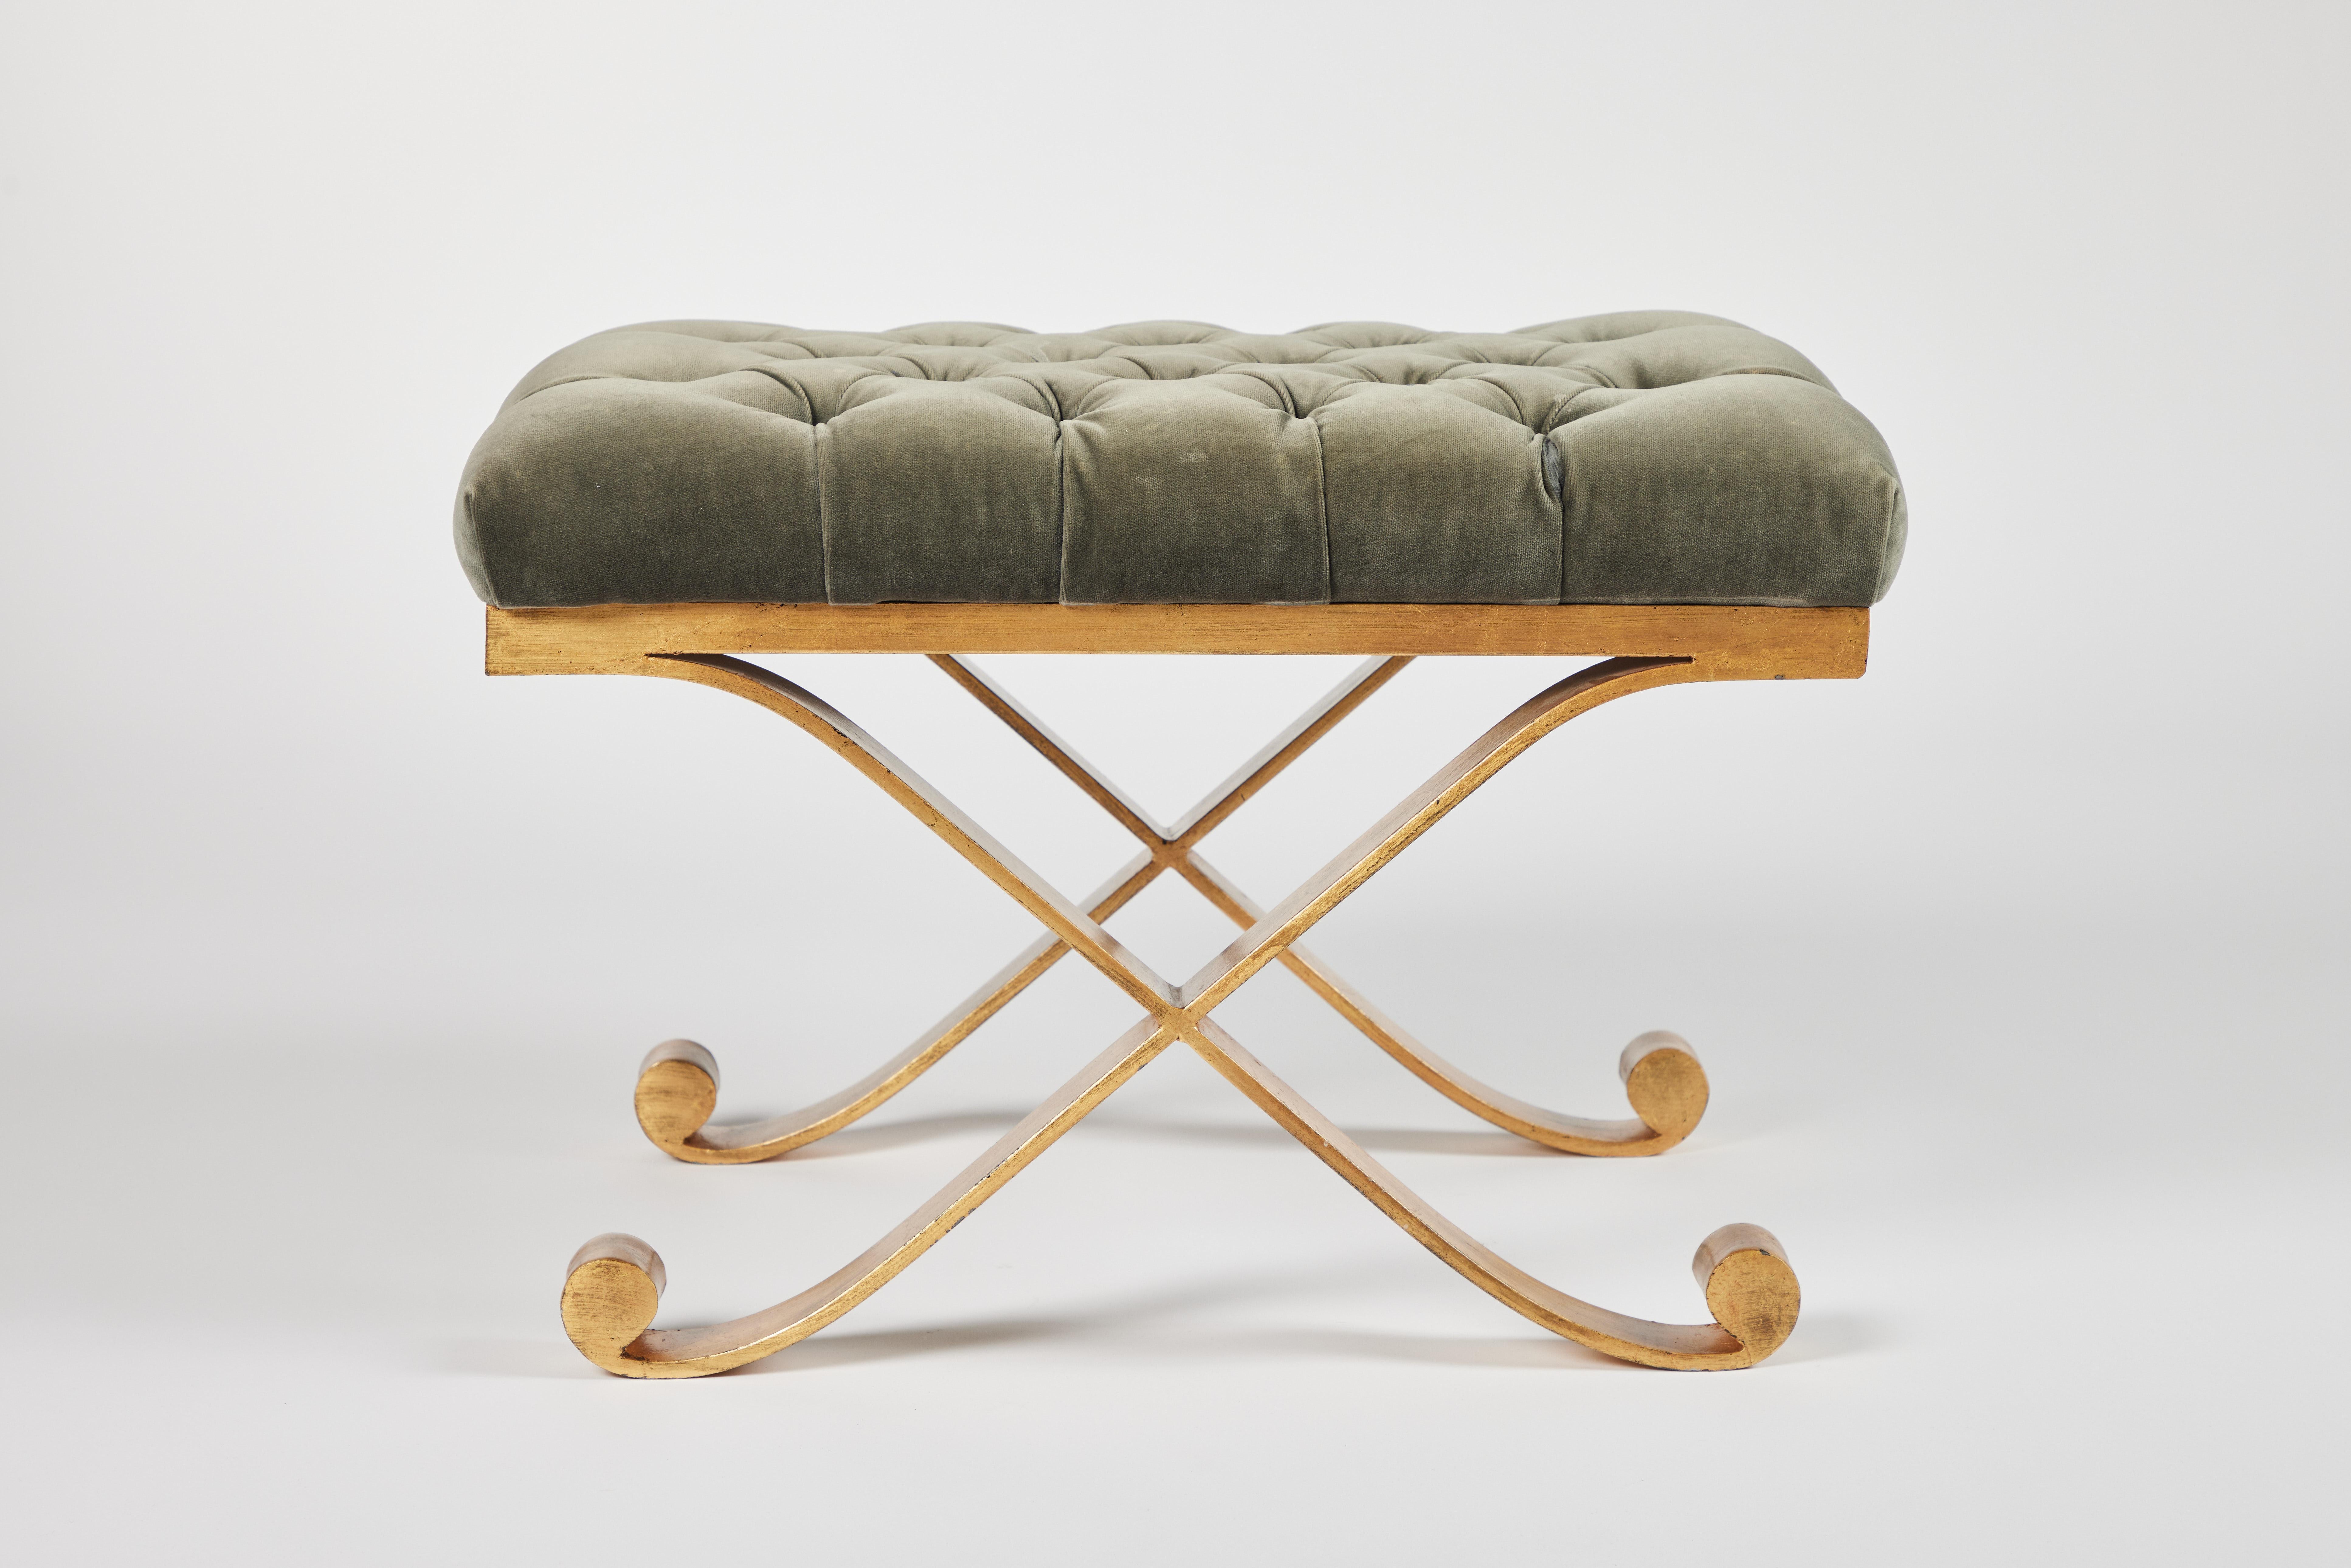 Jean Michel Frank style Anthony bench or ottoman by Mattaliano; 22K gold leaf finish on the iron X base. Tufted velvet top.